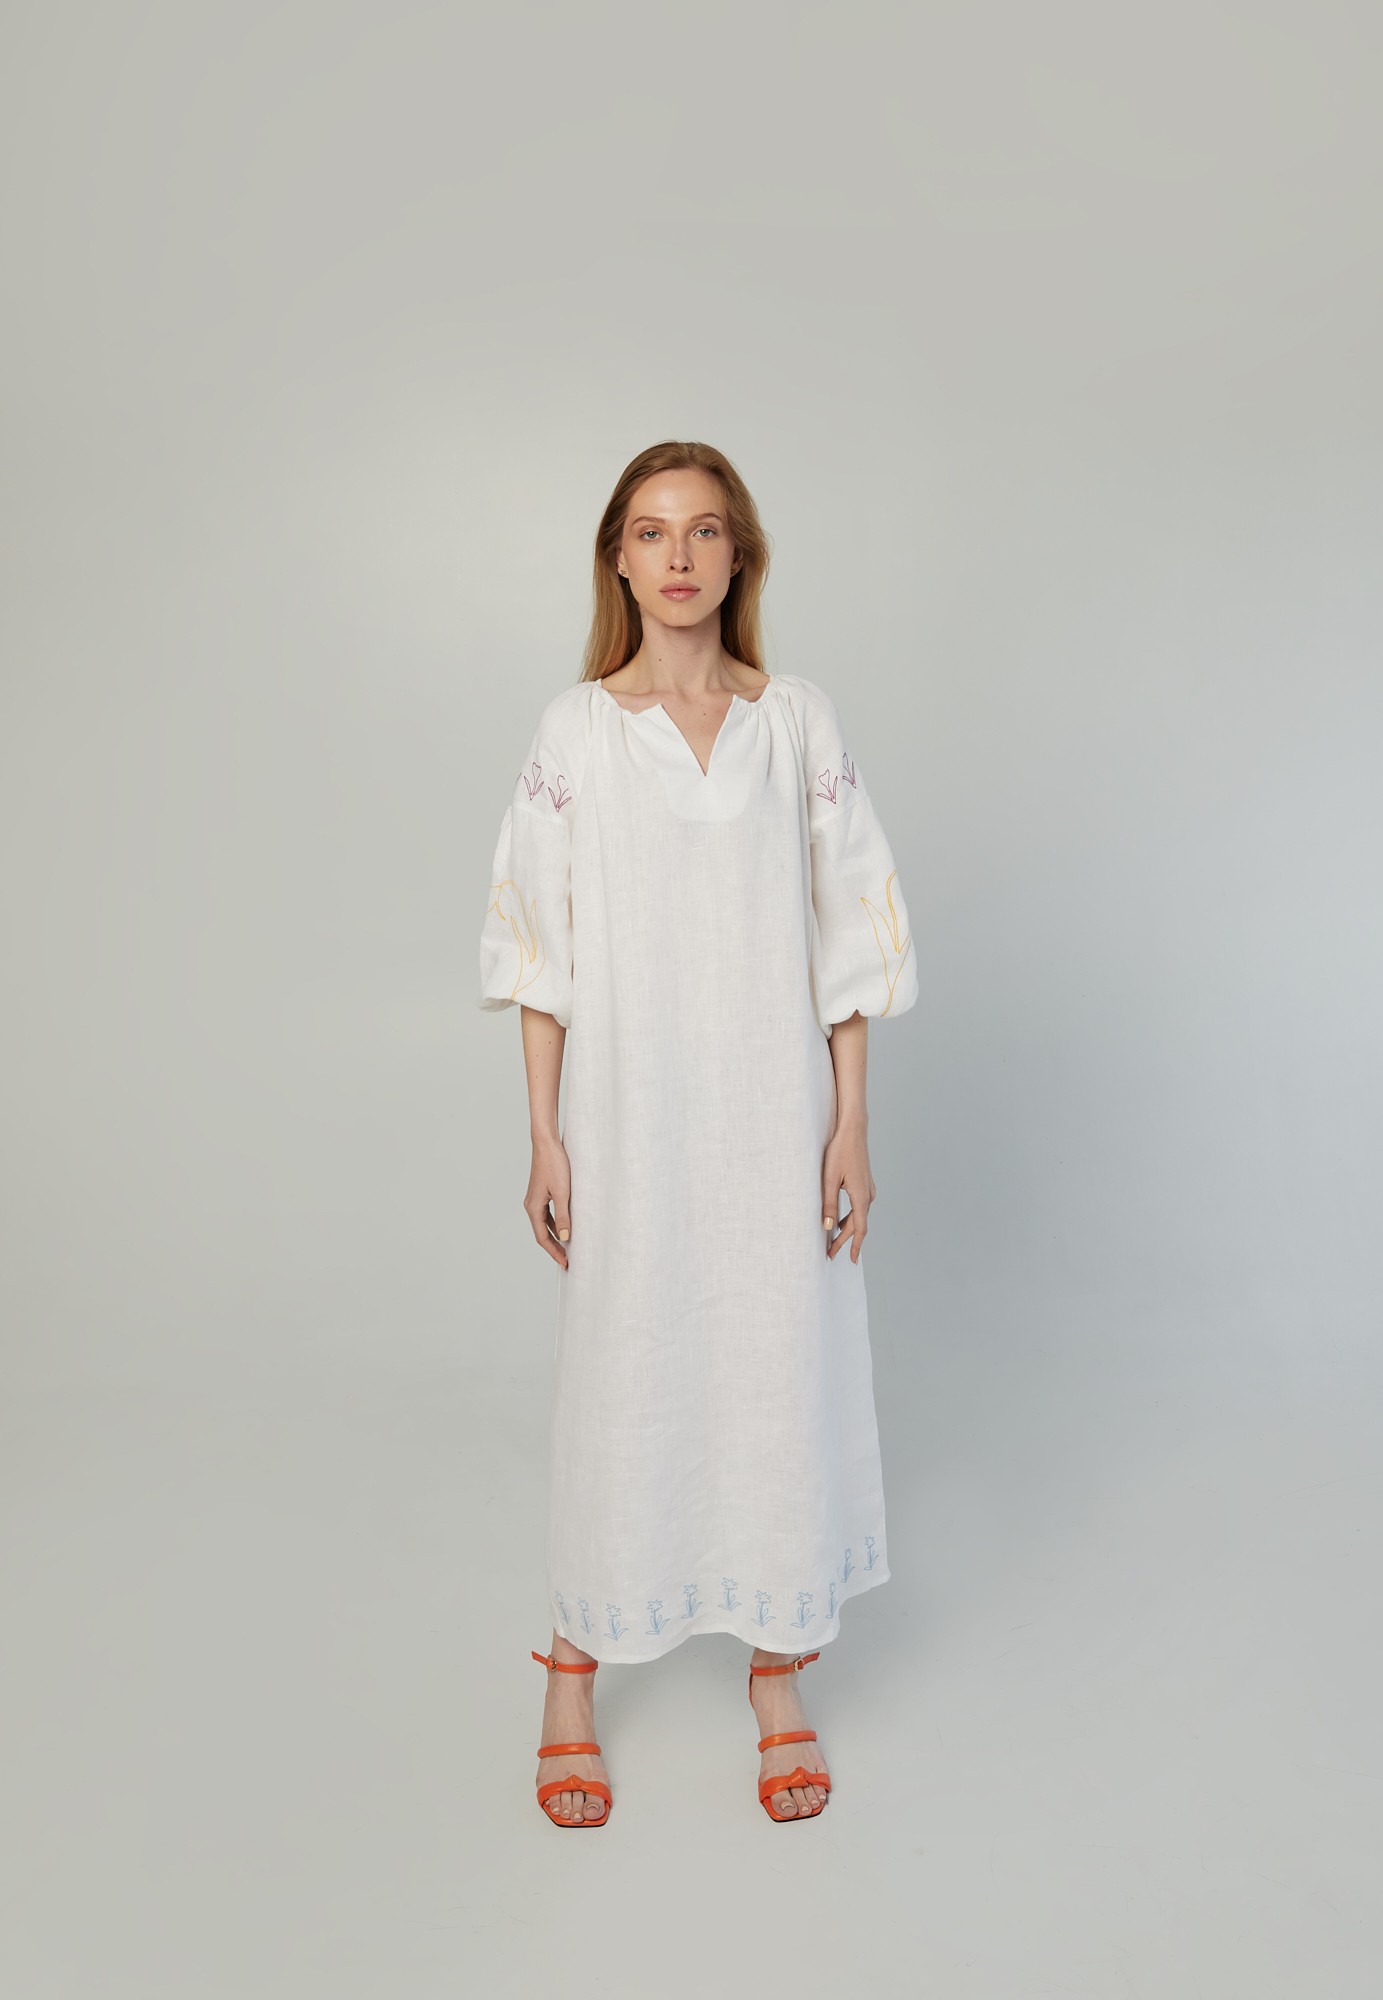 Embroidered oversized linen dress with double colored belts. Kvit Collection